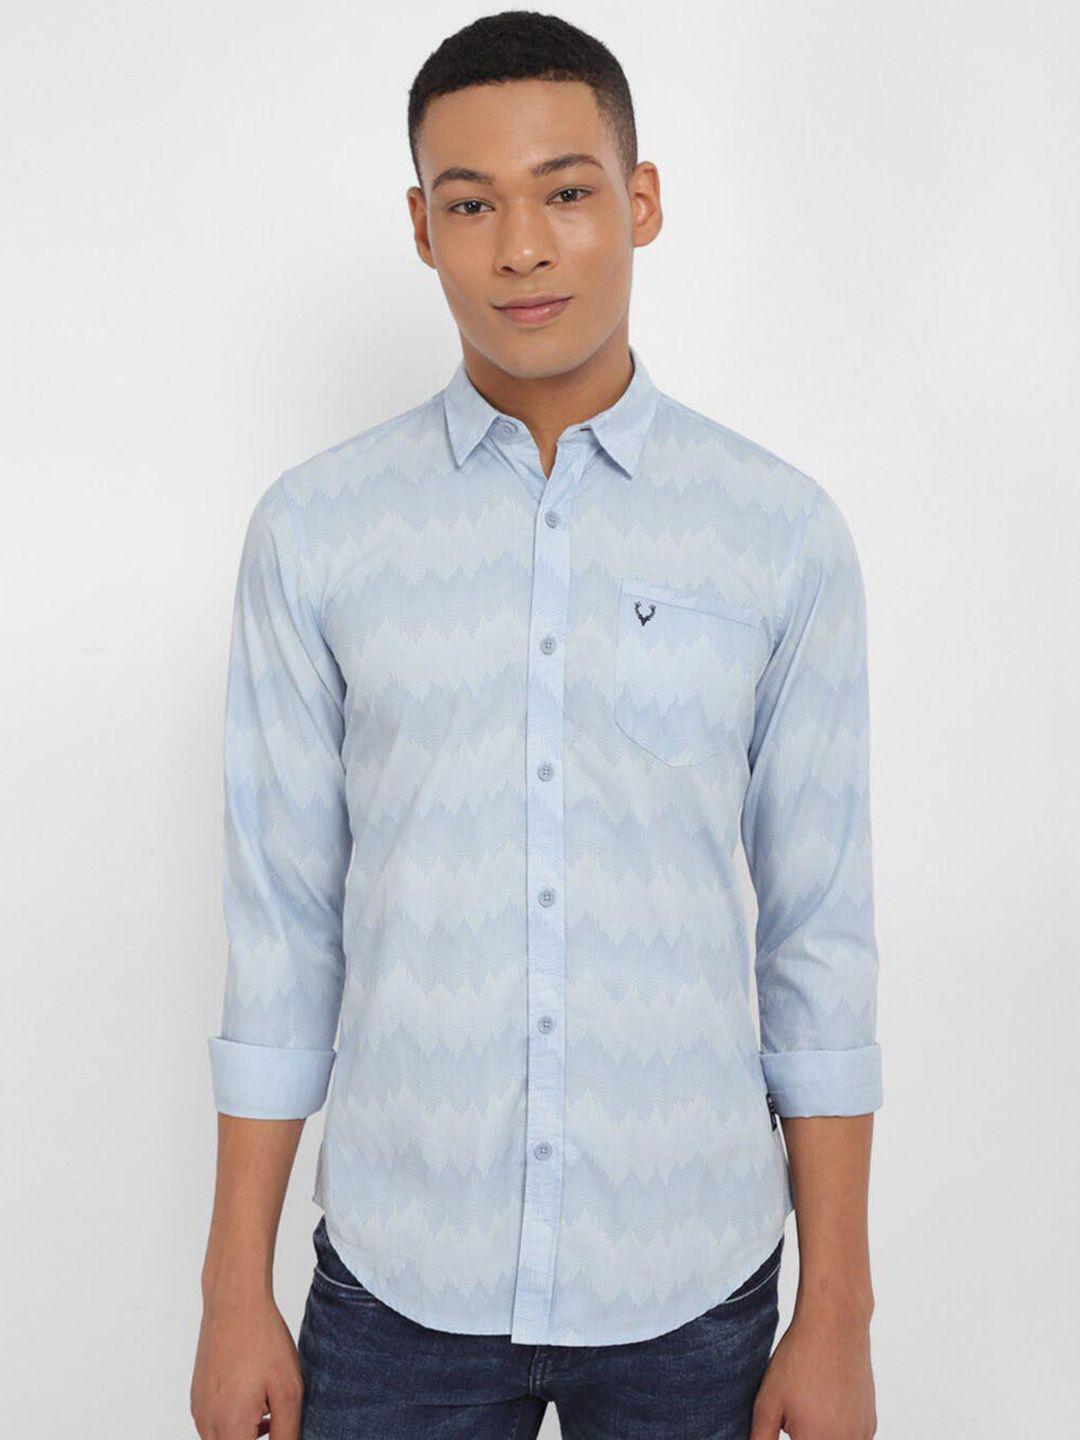 allen solly printed pure cotton casual shirt